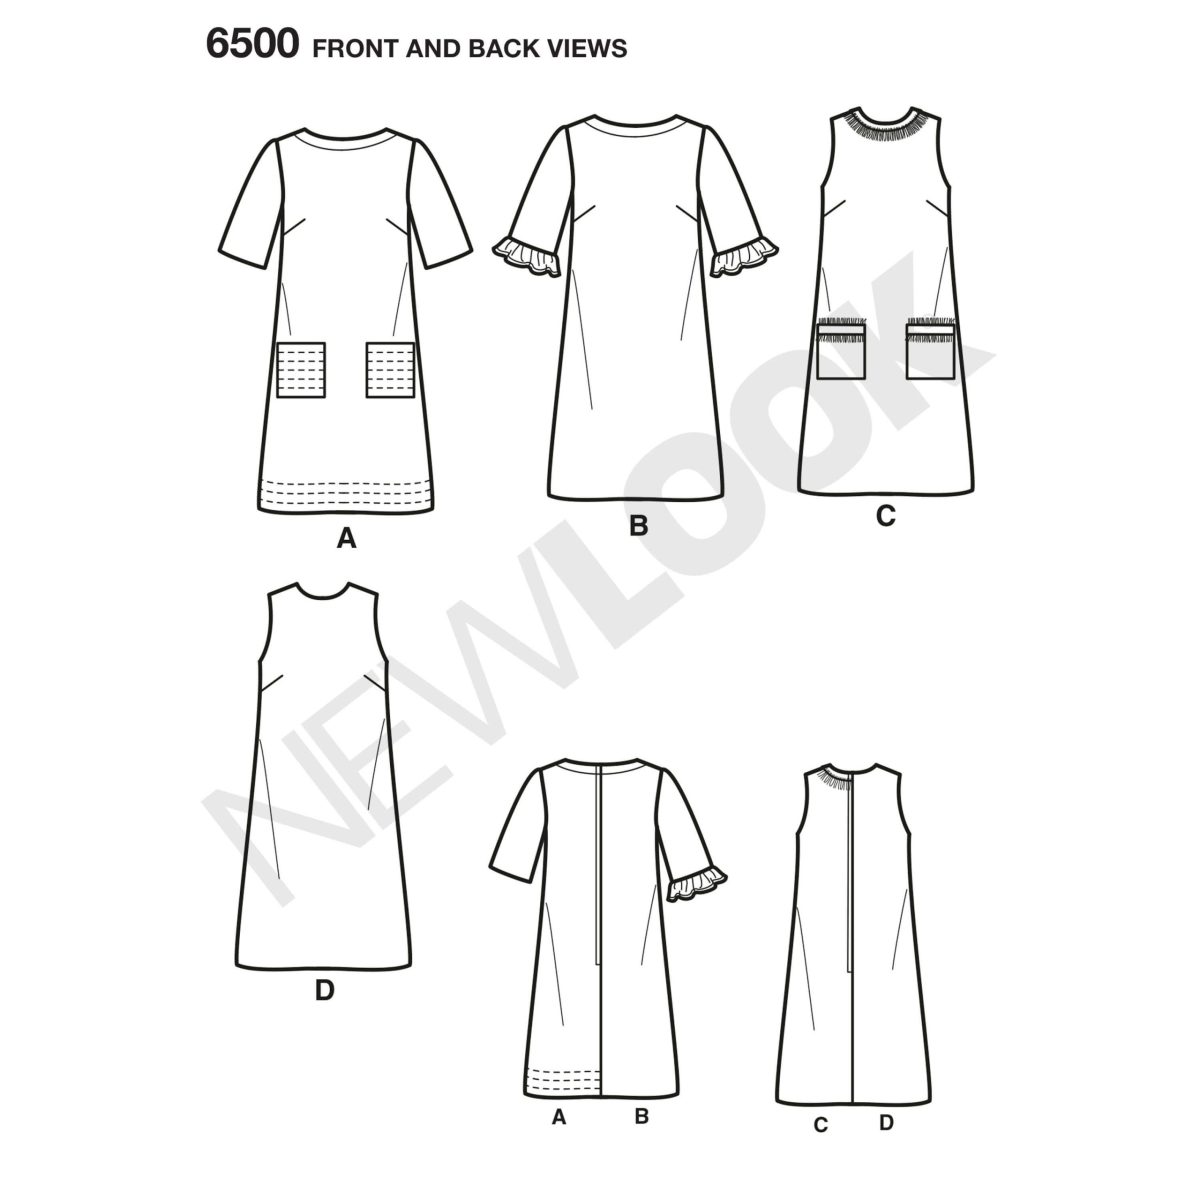 New Look Pattern 6500 Misses Dress with Neckline, Sleeve, and Pocket Variations